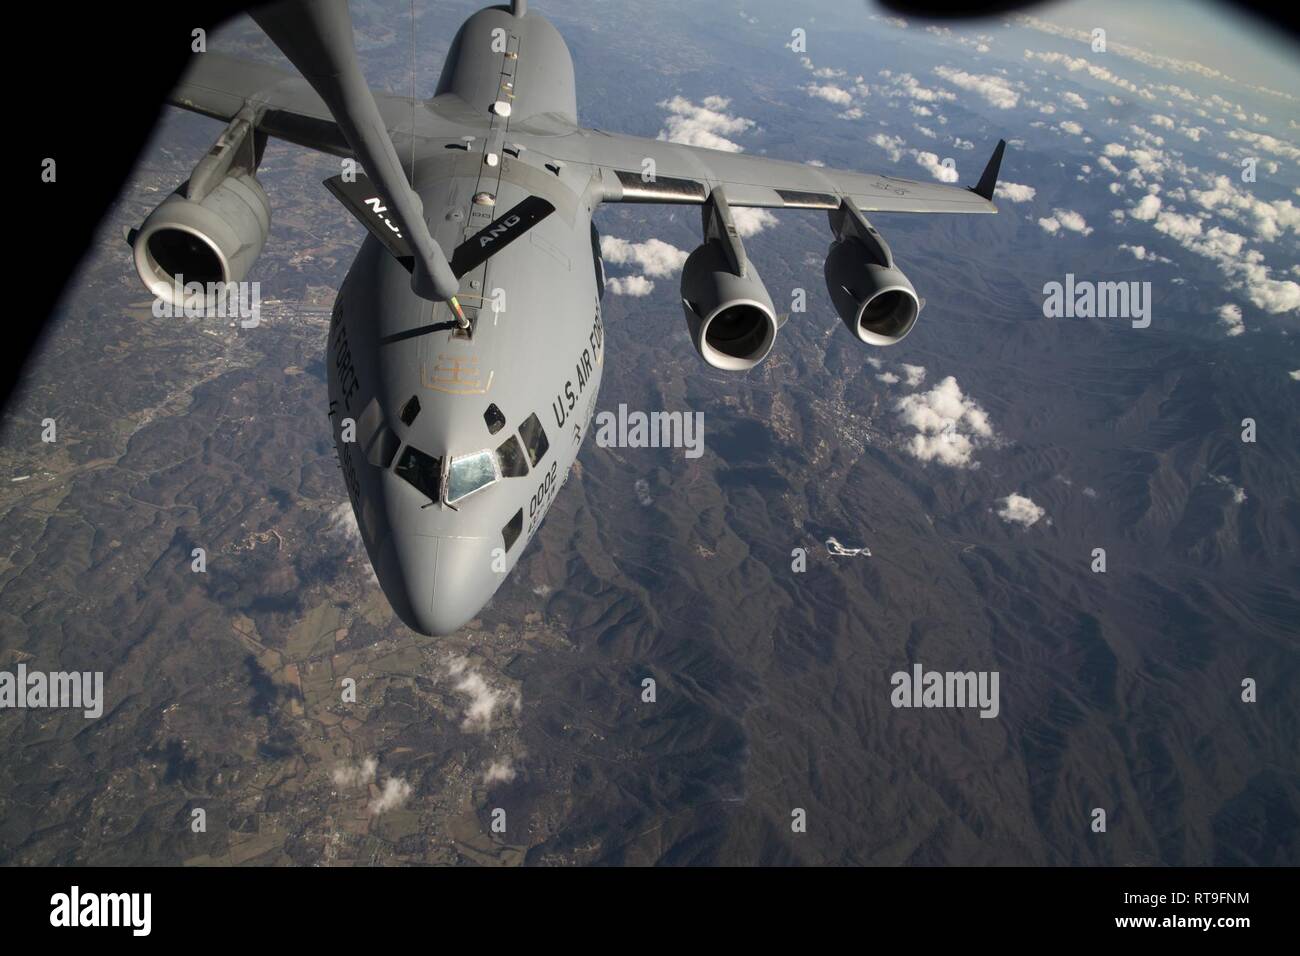 A C-17 Globemaster III from Joint Base Charleston, S.C.,  gets refueled by a KC-135R Stratotanker from Joint Base McGuire-Dix-Lakehurst, N.J., over the continental U.S., Jan. 28, 2019. The KC-135R Stratotanker is flown by the 141st Air Refueling Squadron from the 108th Wing, New Jersey Air National Guard. Stock Photo